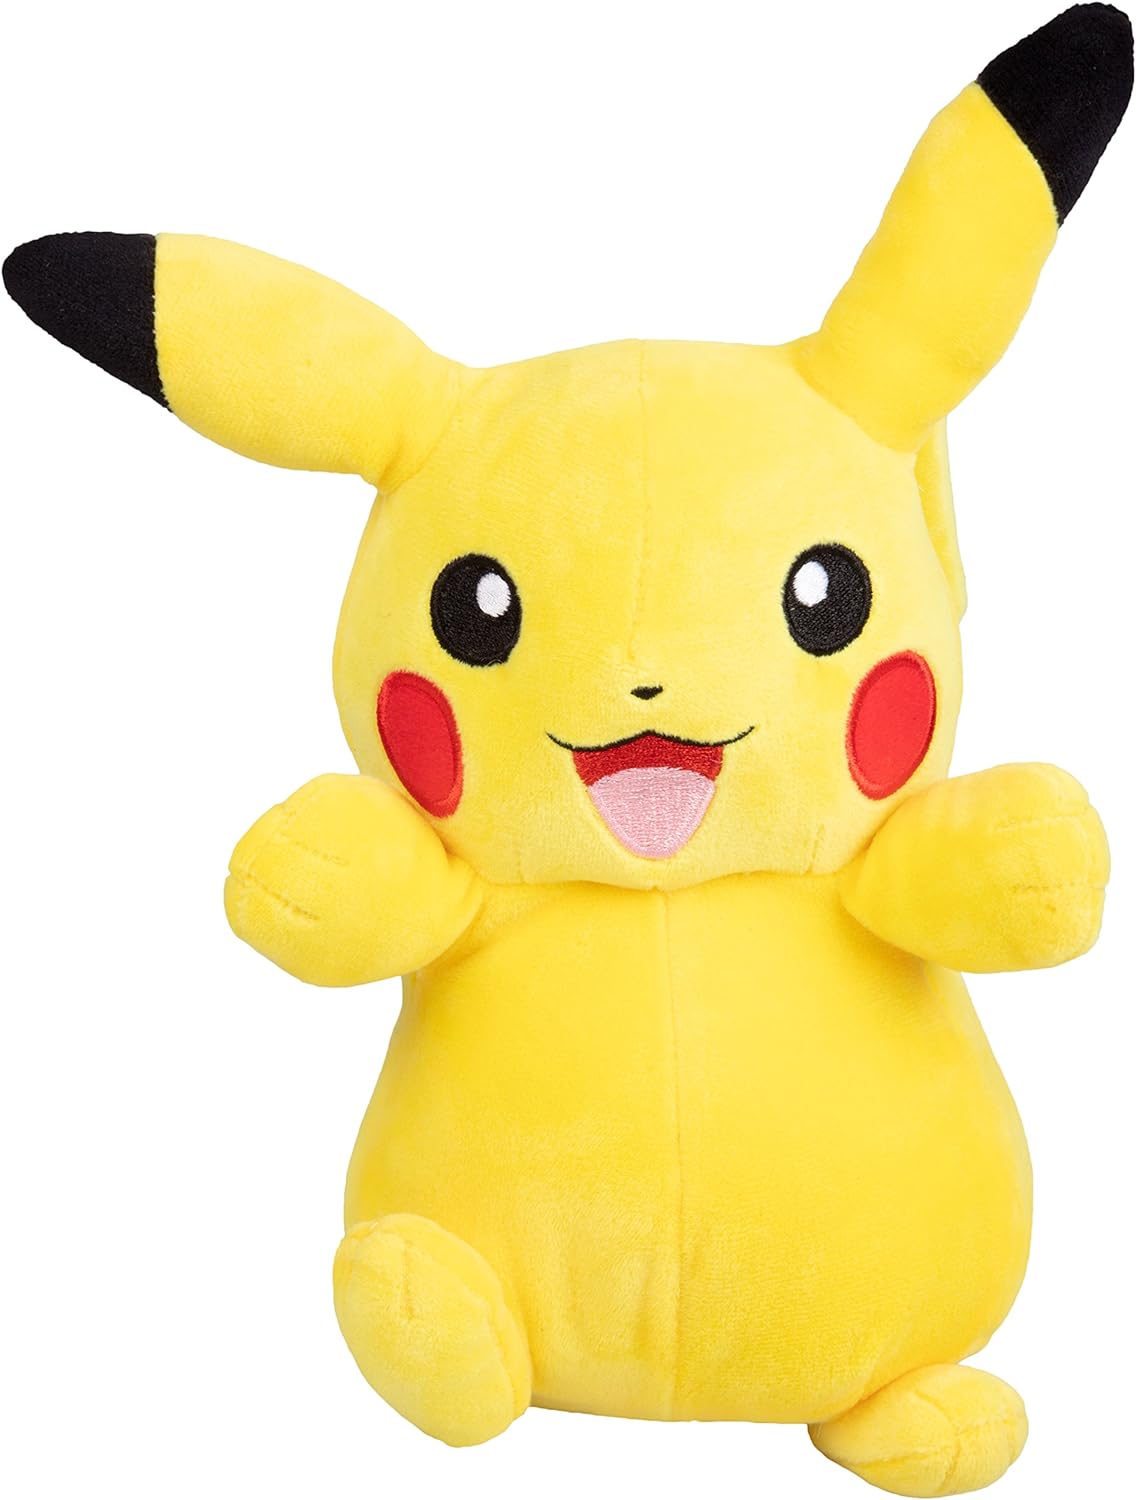 Pokémon 8" Pikachu Plush - Officially Licensed - Quality & Soft Stuffed Animal Toy - Generation One - Great Gift for Kids, Boys, Girls & Fans of Pokemon - 8 Inches